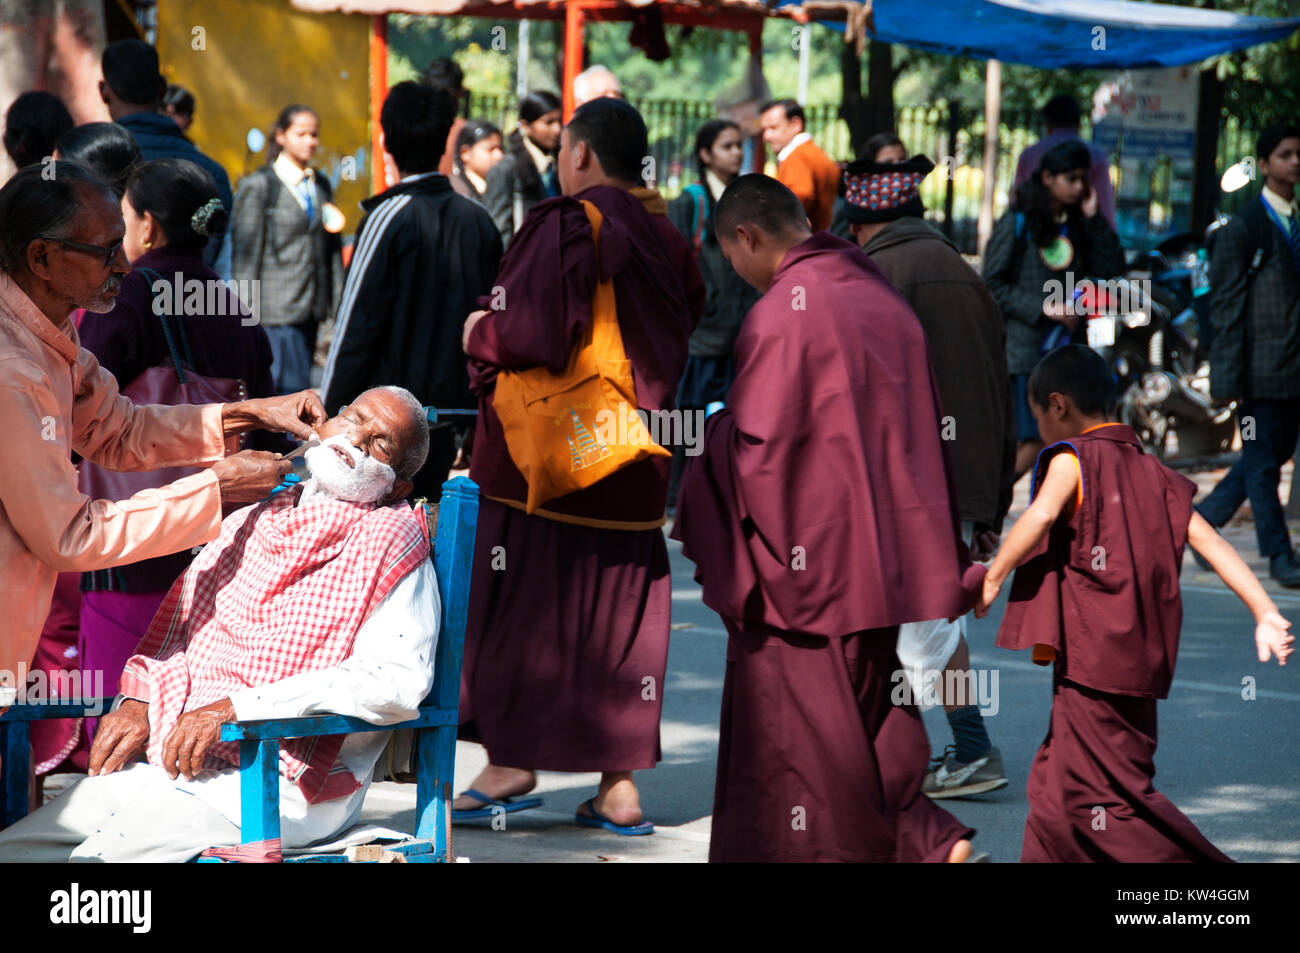 India. Bihar. Bodhgaya. Hairdresser at work on the street...shaving a customer whilst a group of  monks walks by. Stock Photo